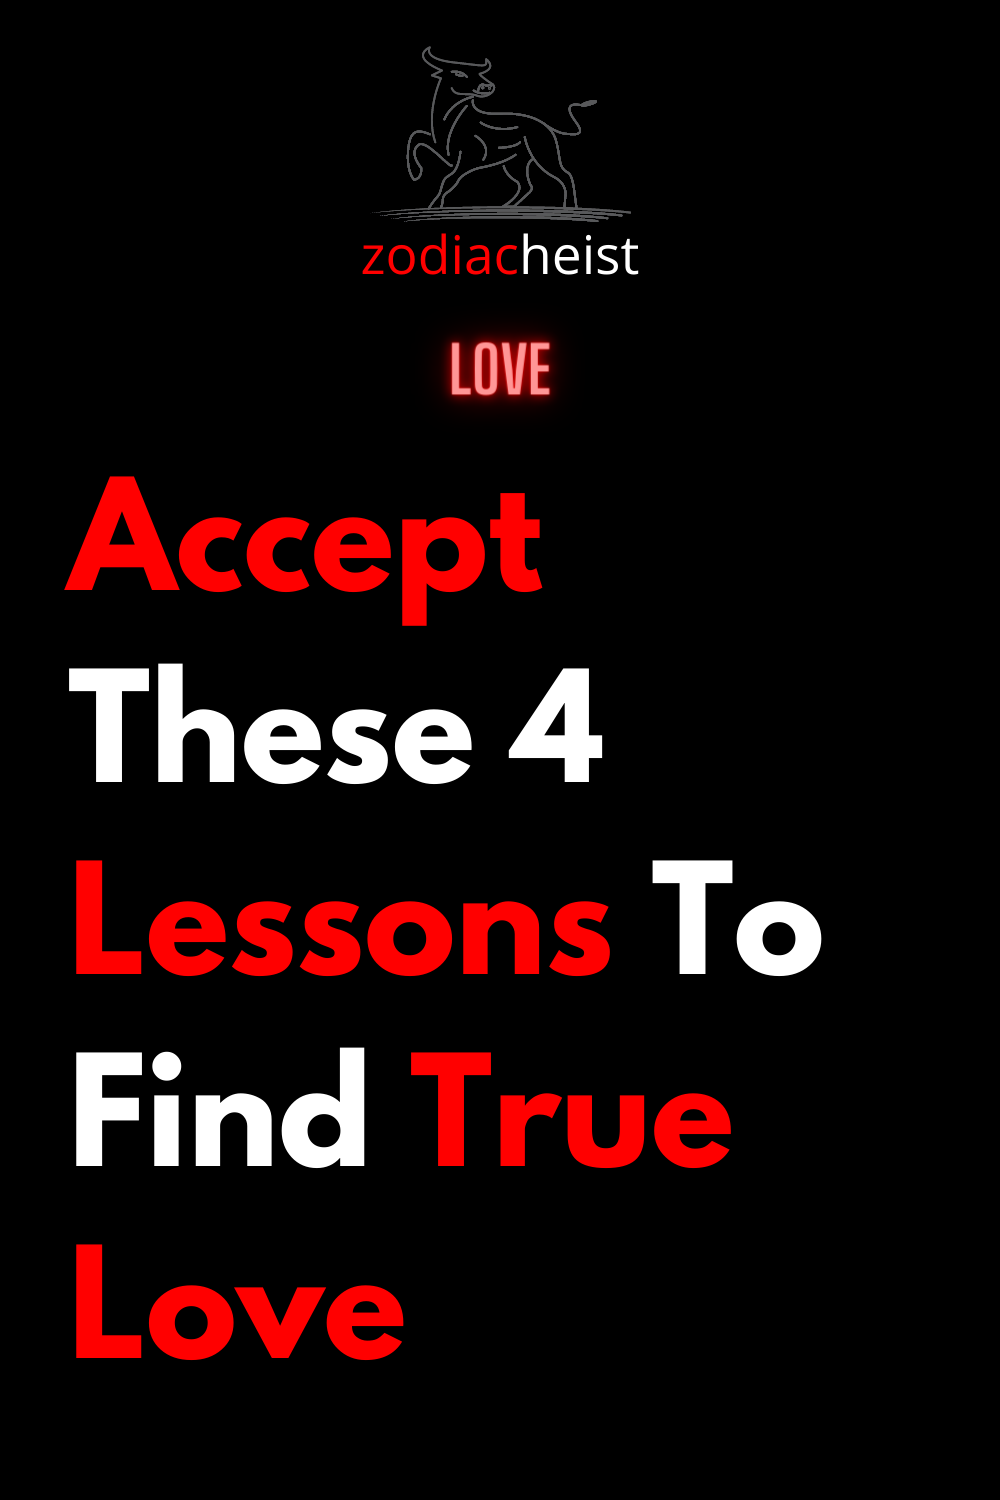 Accept These 4 Lessons To Find True Love